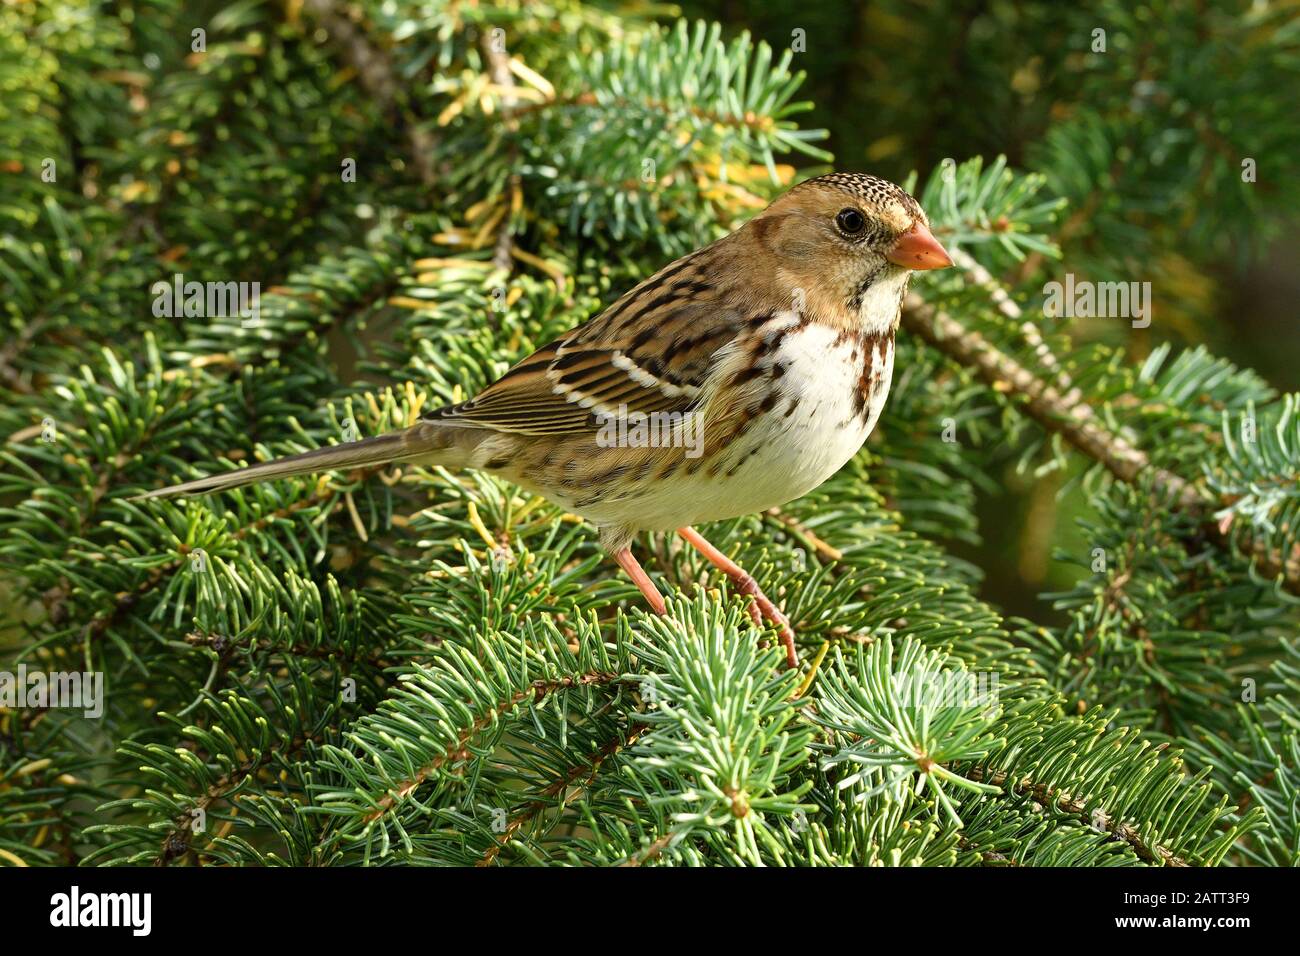 An immature Harris's Sparrow bird 'Zonotrichia querela', perched in the green branches of a spruce tree in rural Alberta Canada. Stock Photo